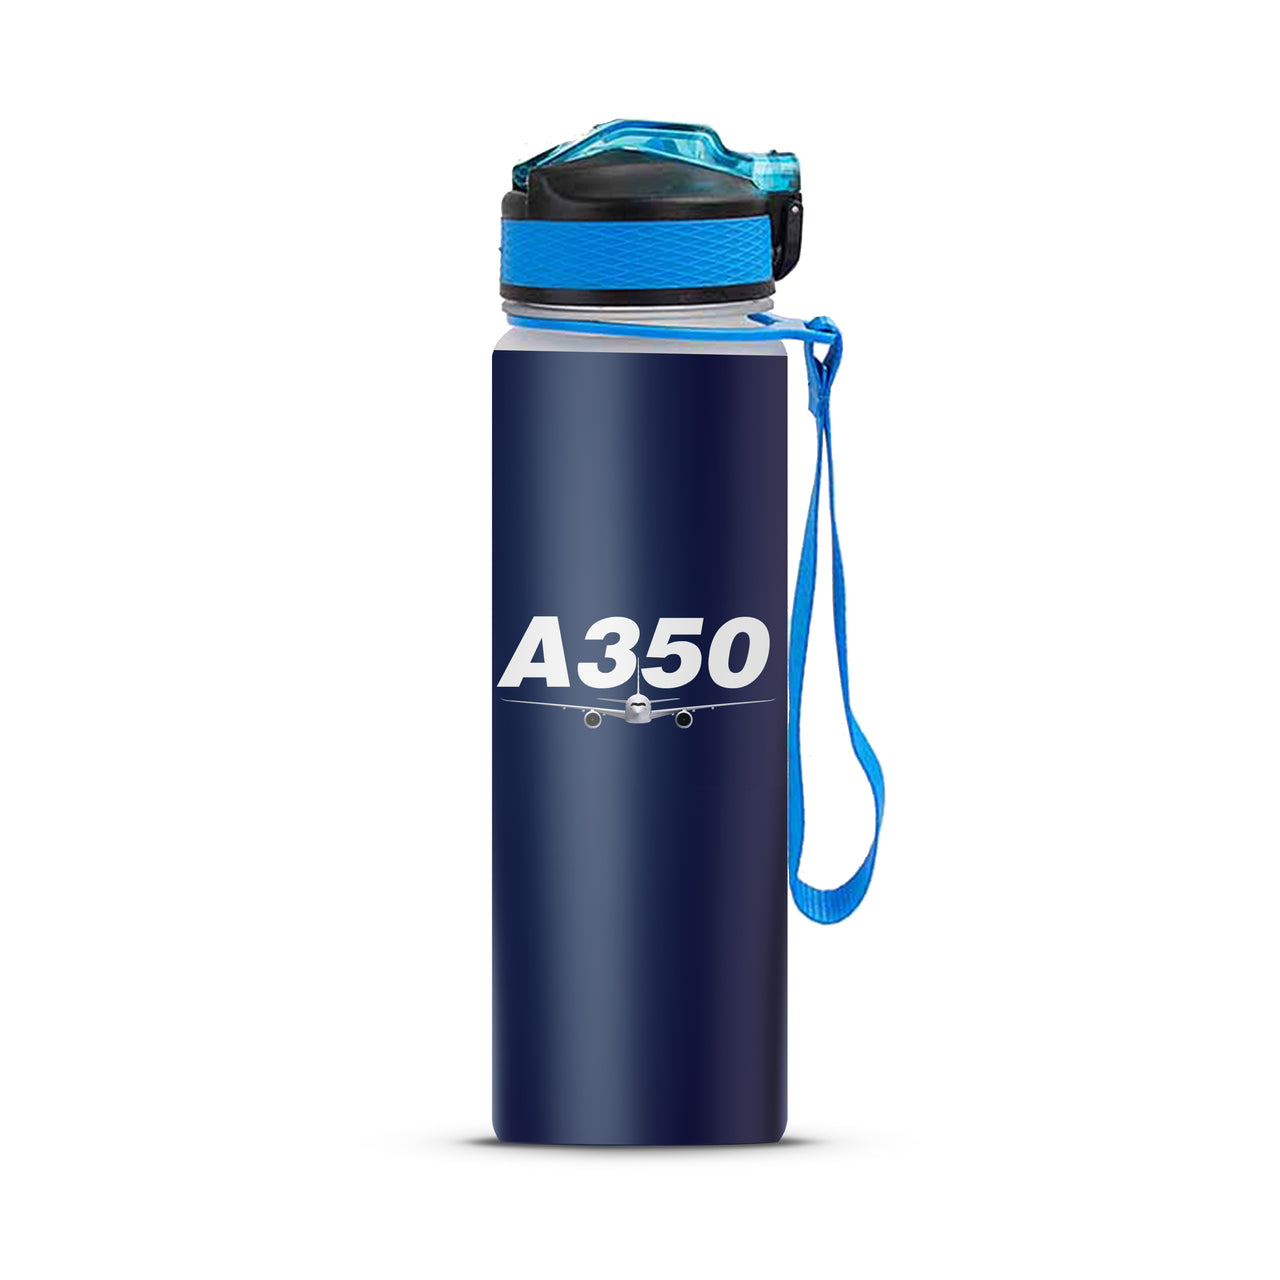 Super Airbus A350 Designed Sports Kettles